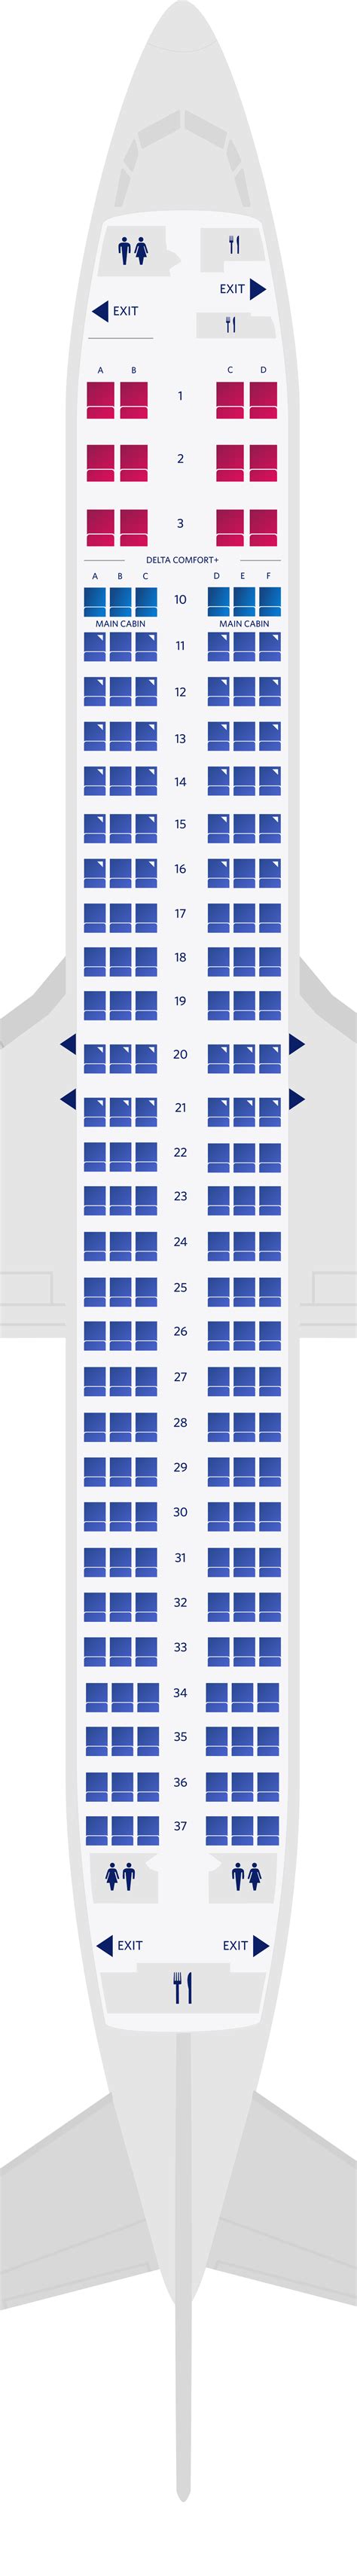 Delta 787-9 seat map. The Boeing 787-9 V.2 is an aircraft produced by Boeing for American Airlines and has the following seat configuration: 0-51-32-161. Business. Premium economy. Economy. Explore American Airlines Boeing 787 seating with amenities, legroom and recline data. Find a perfect seat in First, Business or Economy | SeatMaps. 